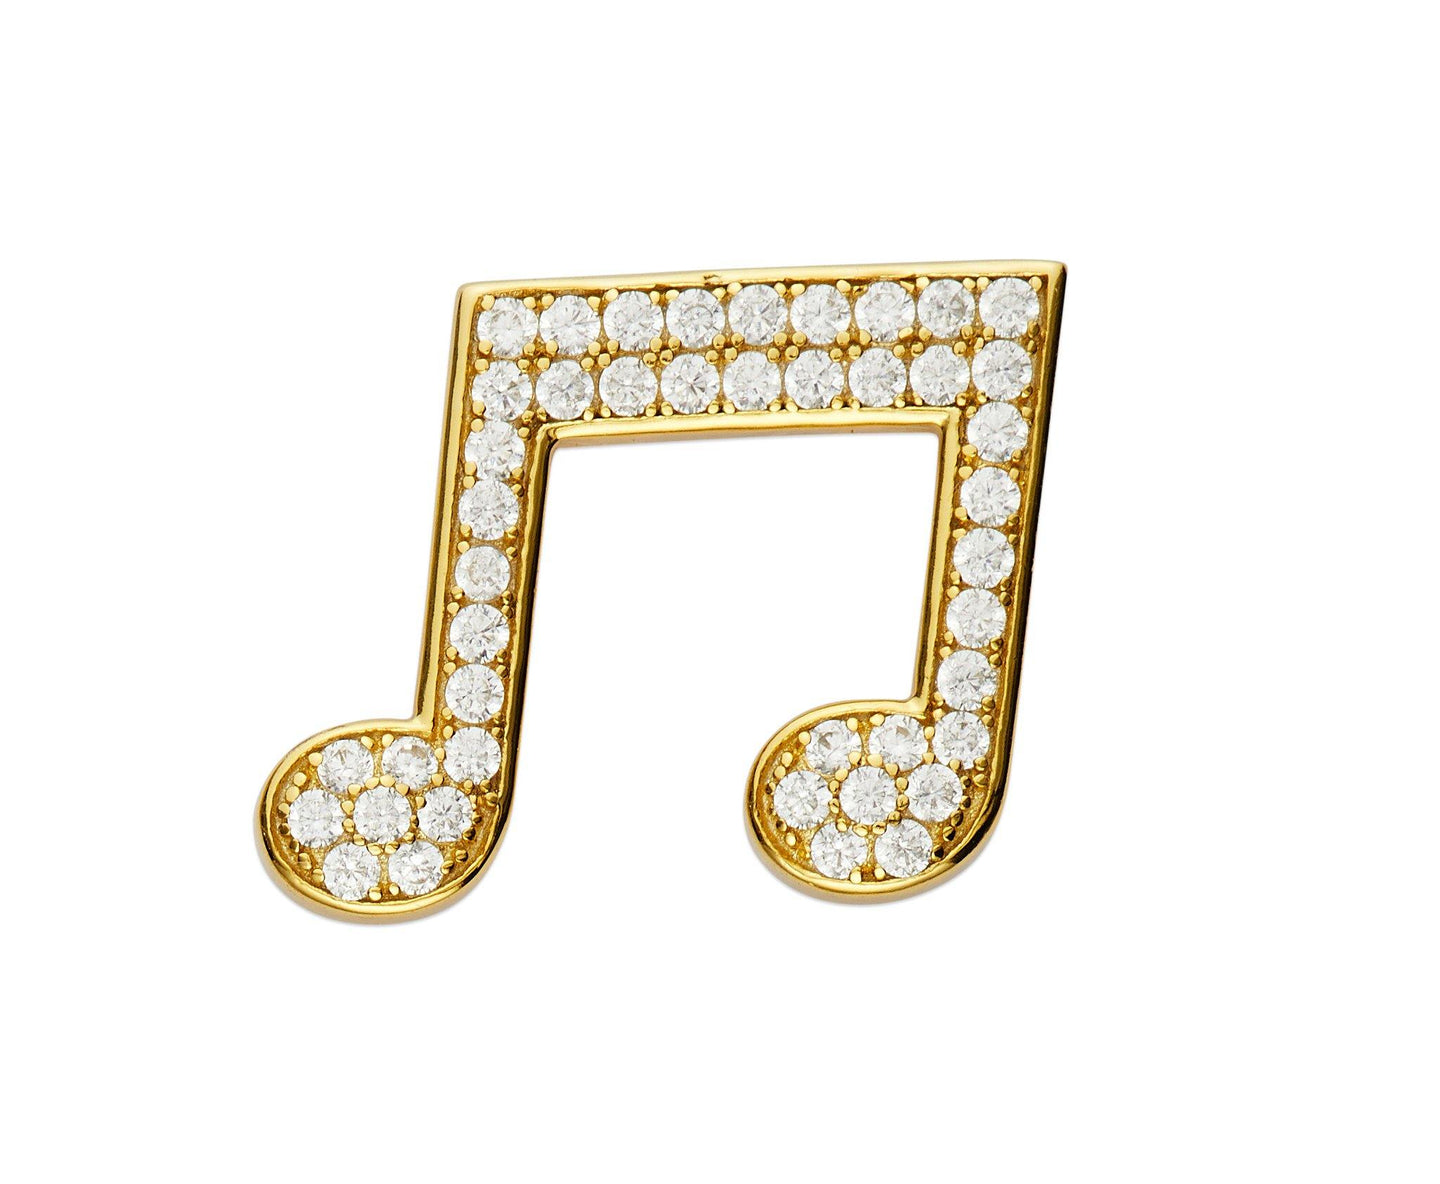 Music Note Lapel Pin - InclusiveJewelry